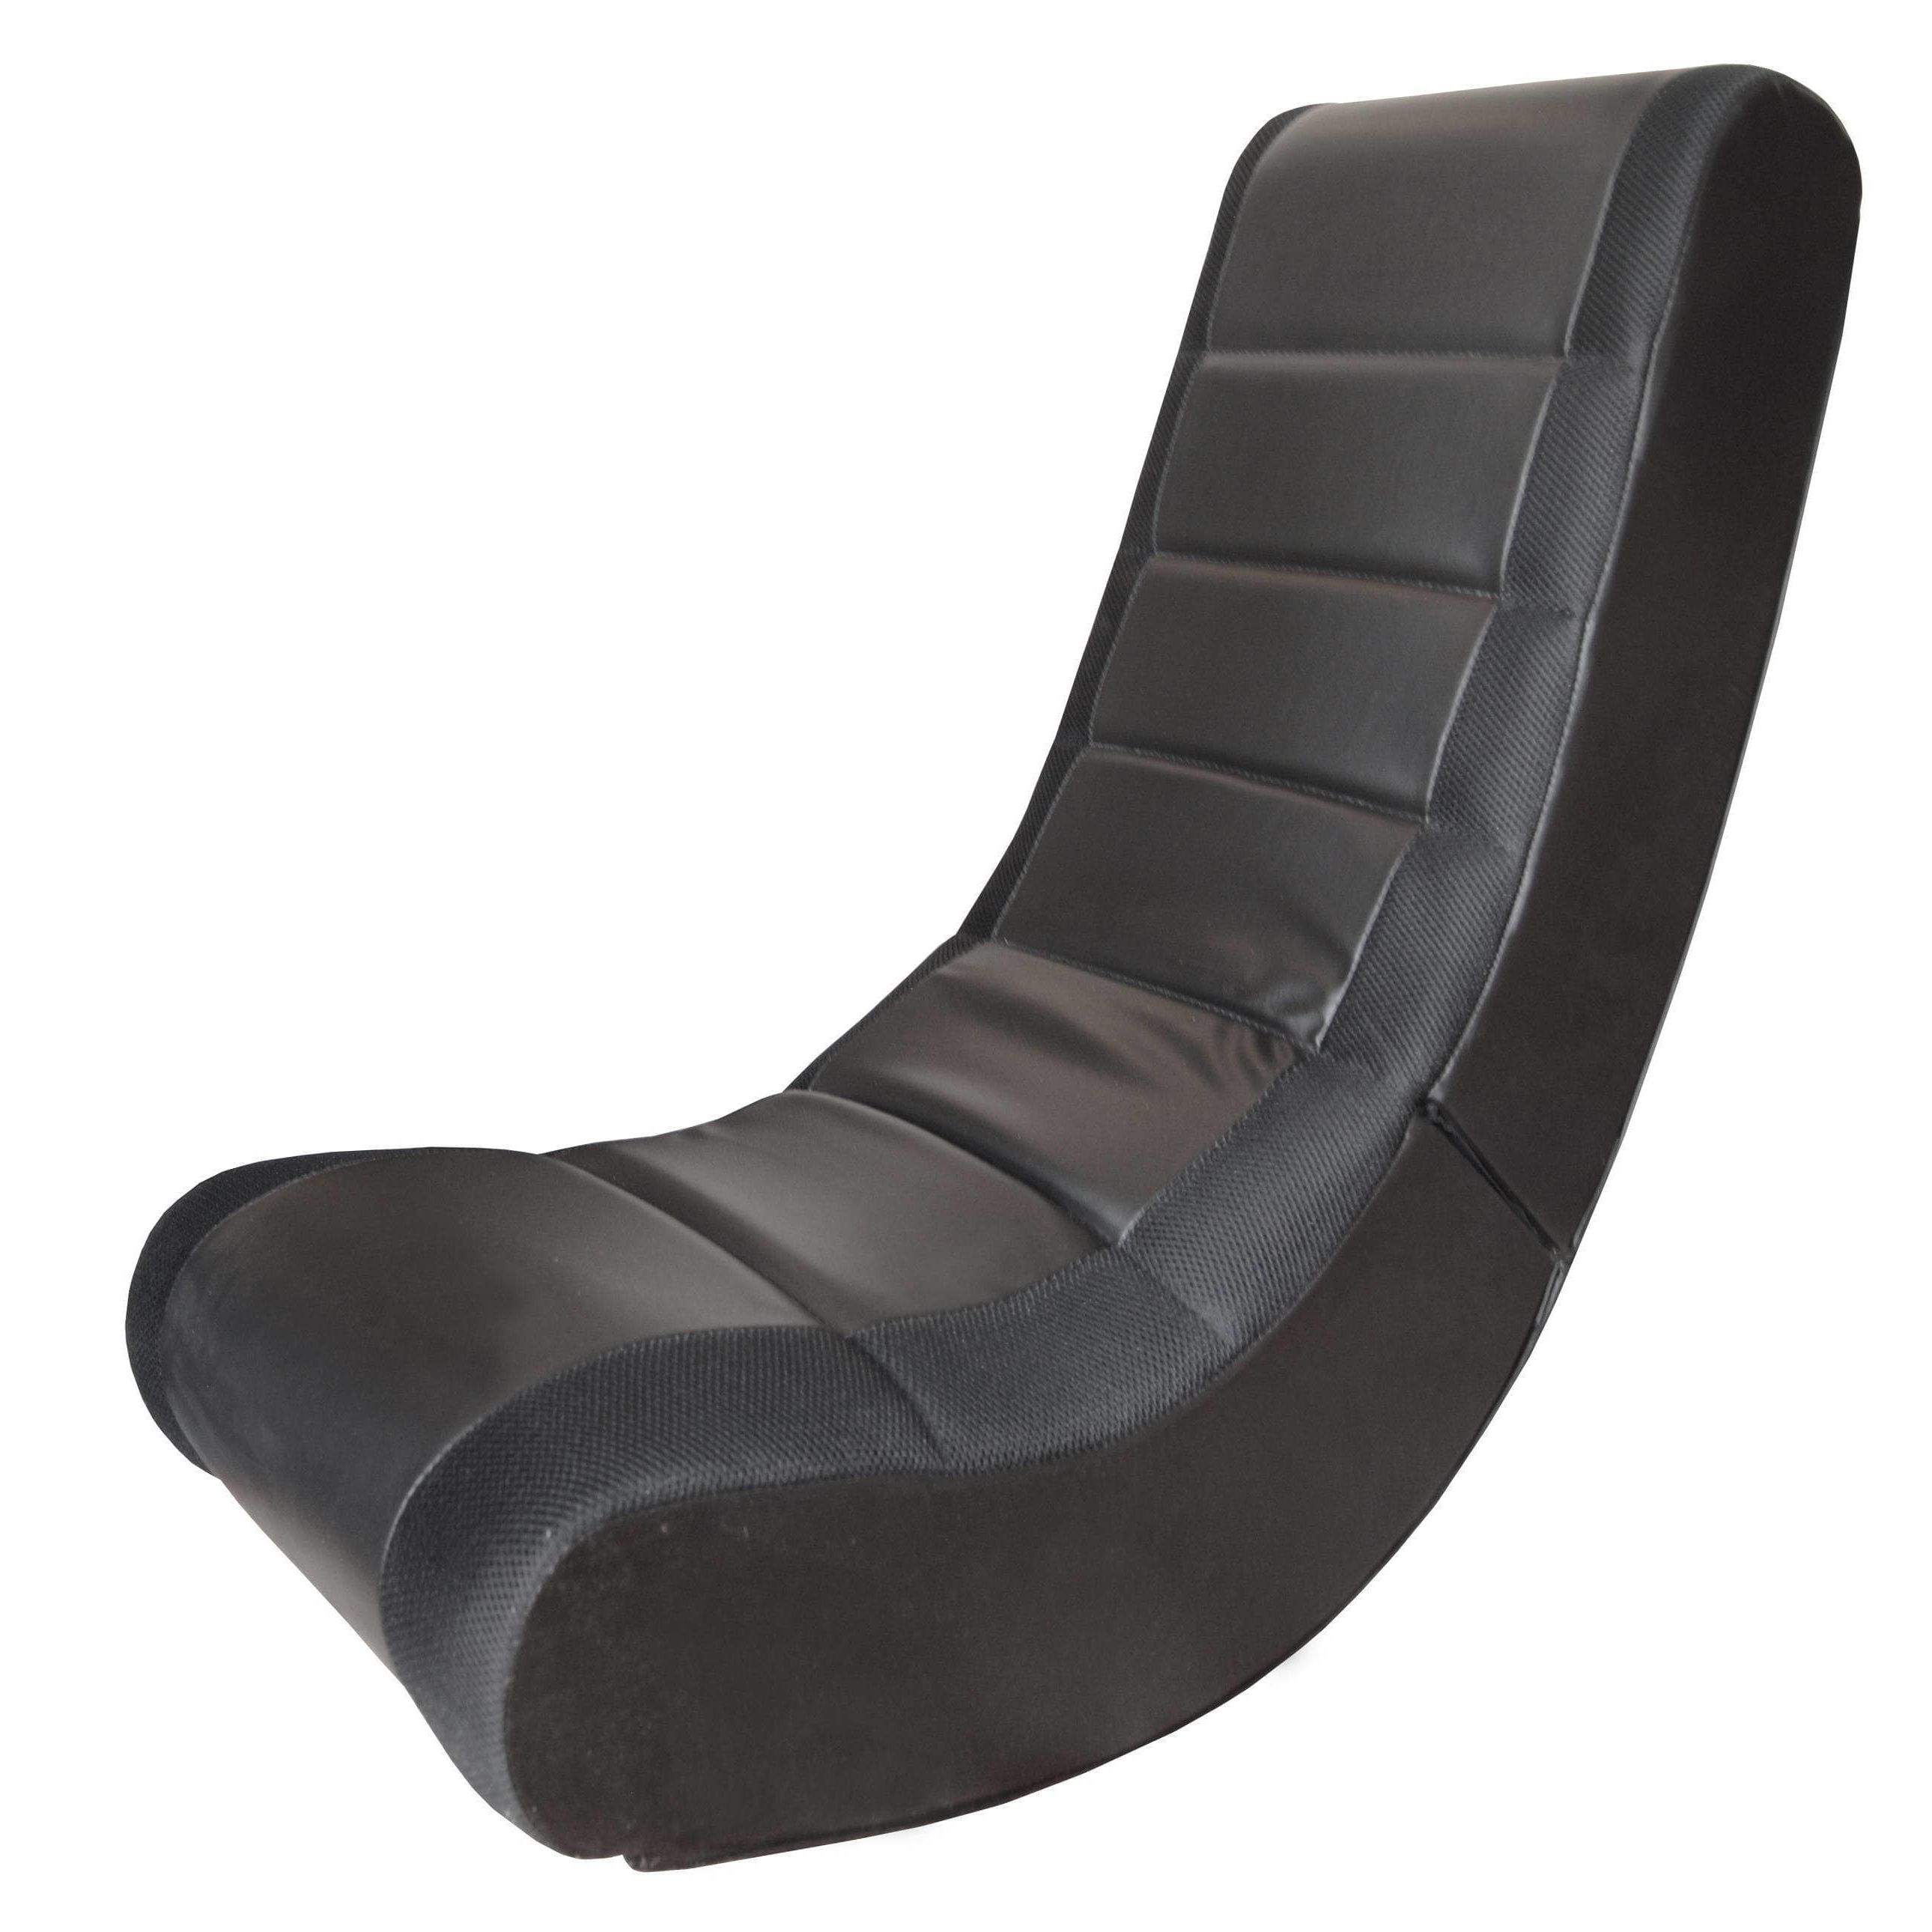 Latest Gaming Sofa Chairs Regarding Xp1 Folding Gaming Chair – Free Shipping Today – Overstock (View 15 of 15)